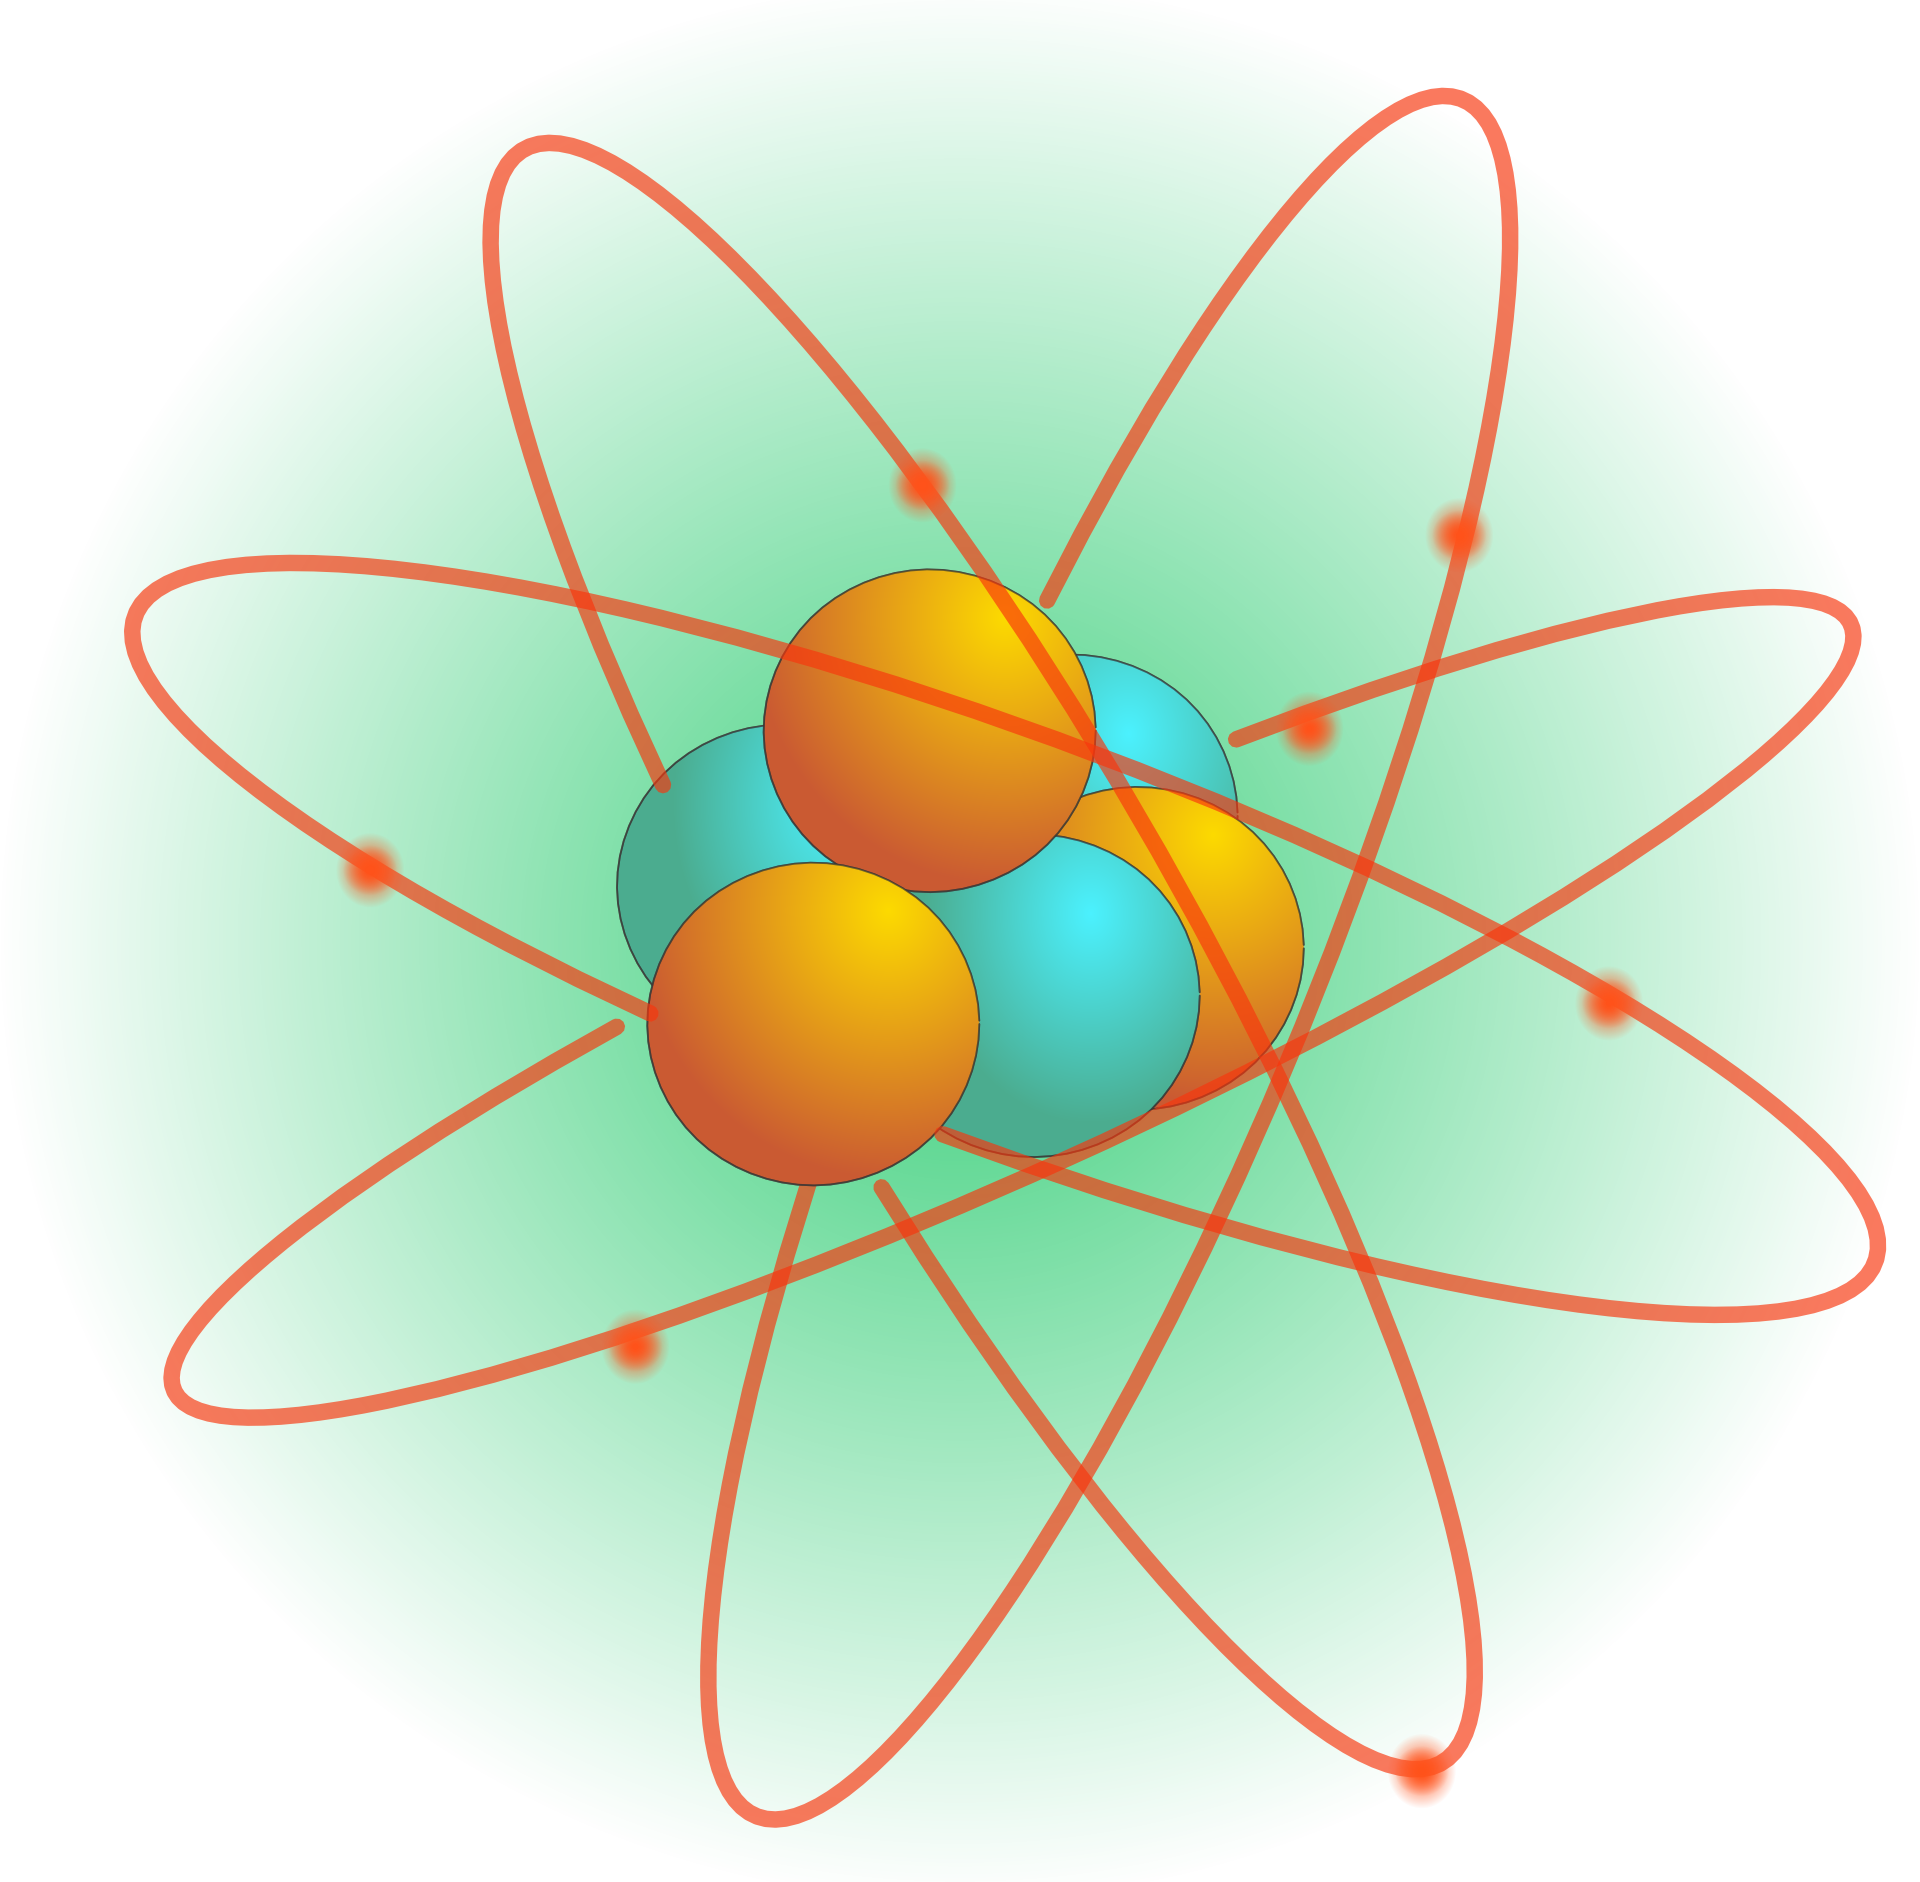 Atomic Theory Explained: Dalton, Rutherford, Bohr, and Schrödinger